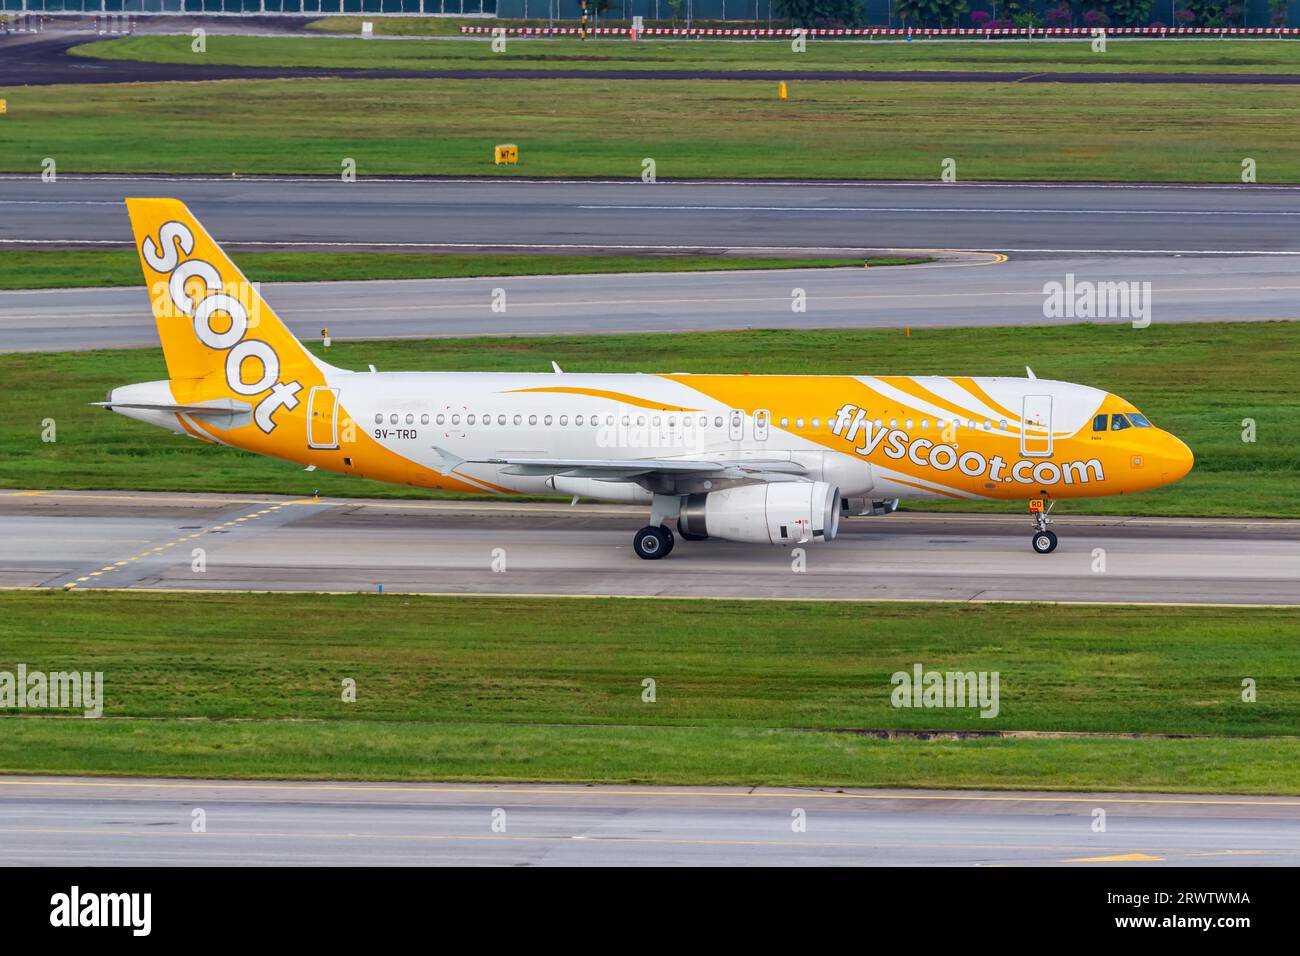 Changi, Singapore - February 3, 2023: Scoot Airbus A320 airplane at Changi Airport in Singapore. Stock Photo